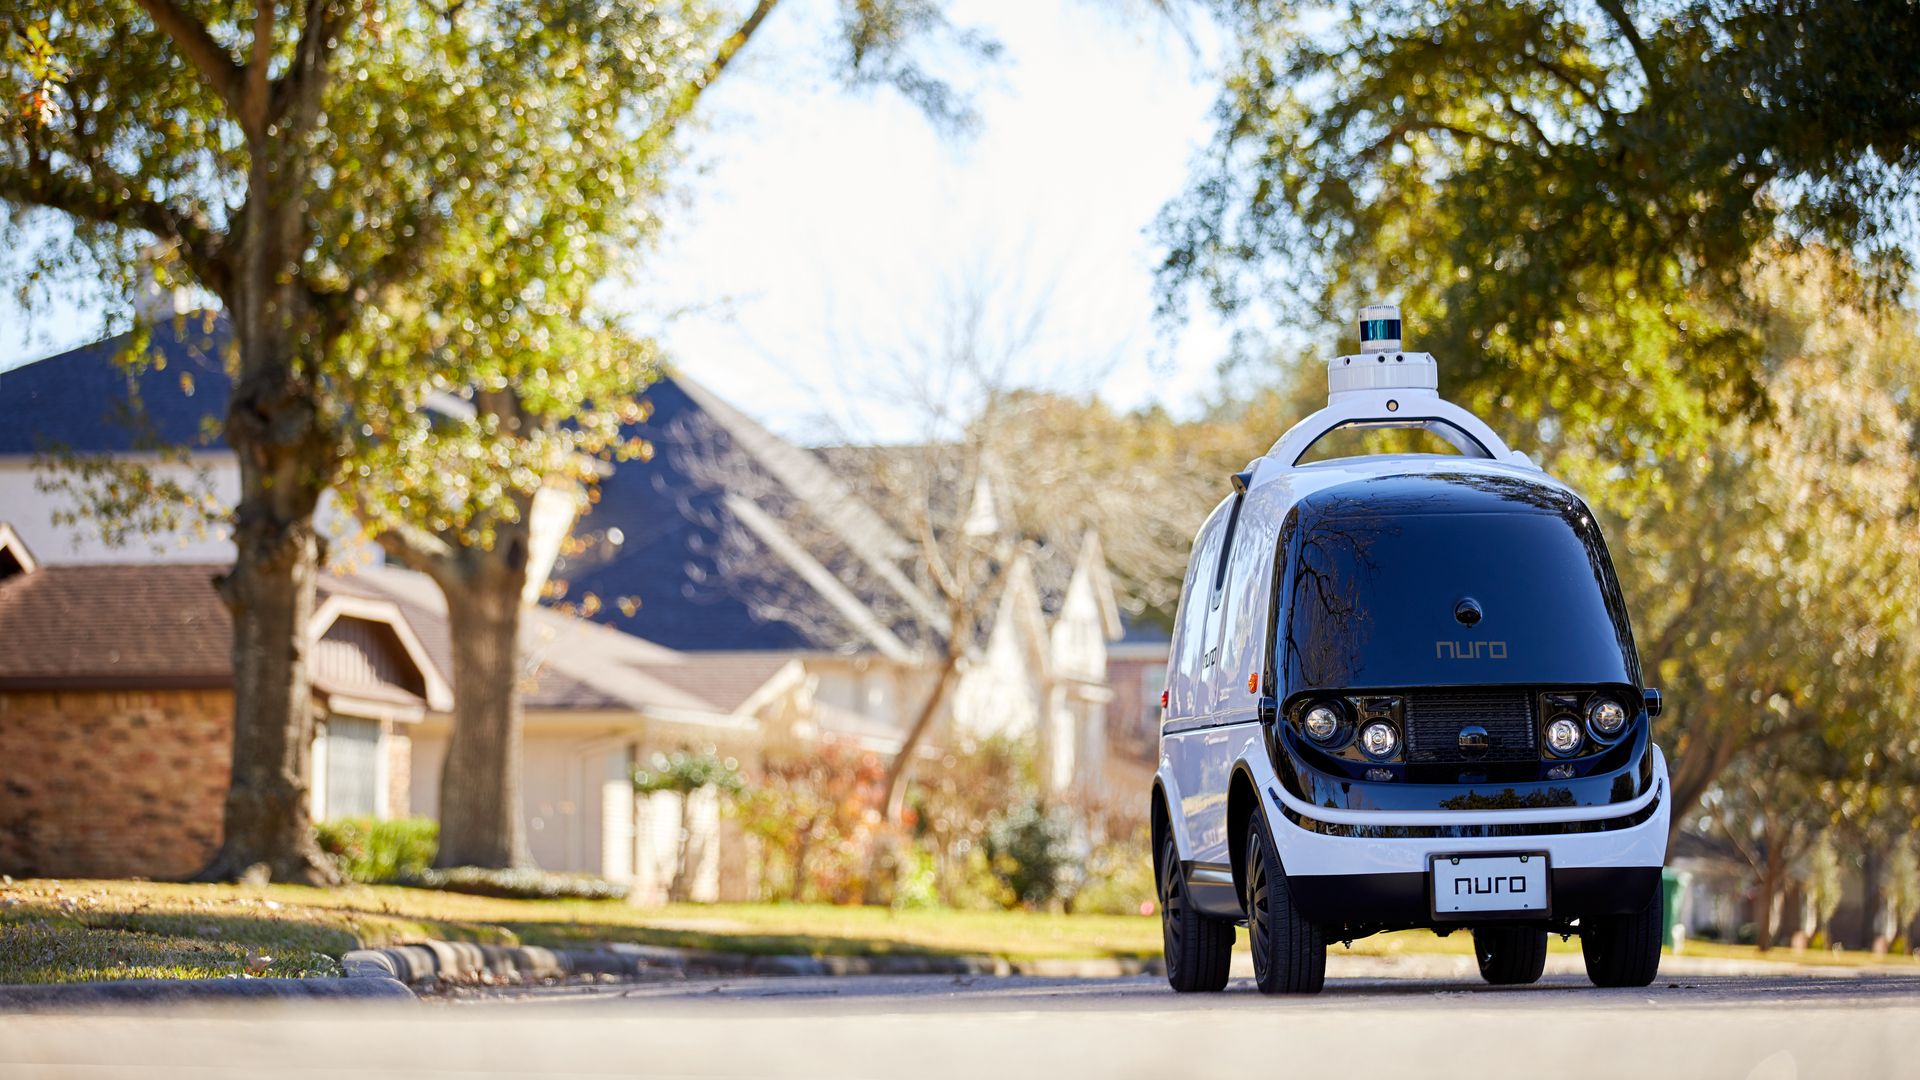 Image of Nuro driverless delivery vehicle on a suburban street. 